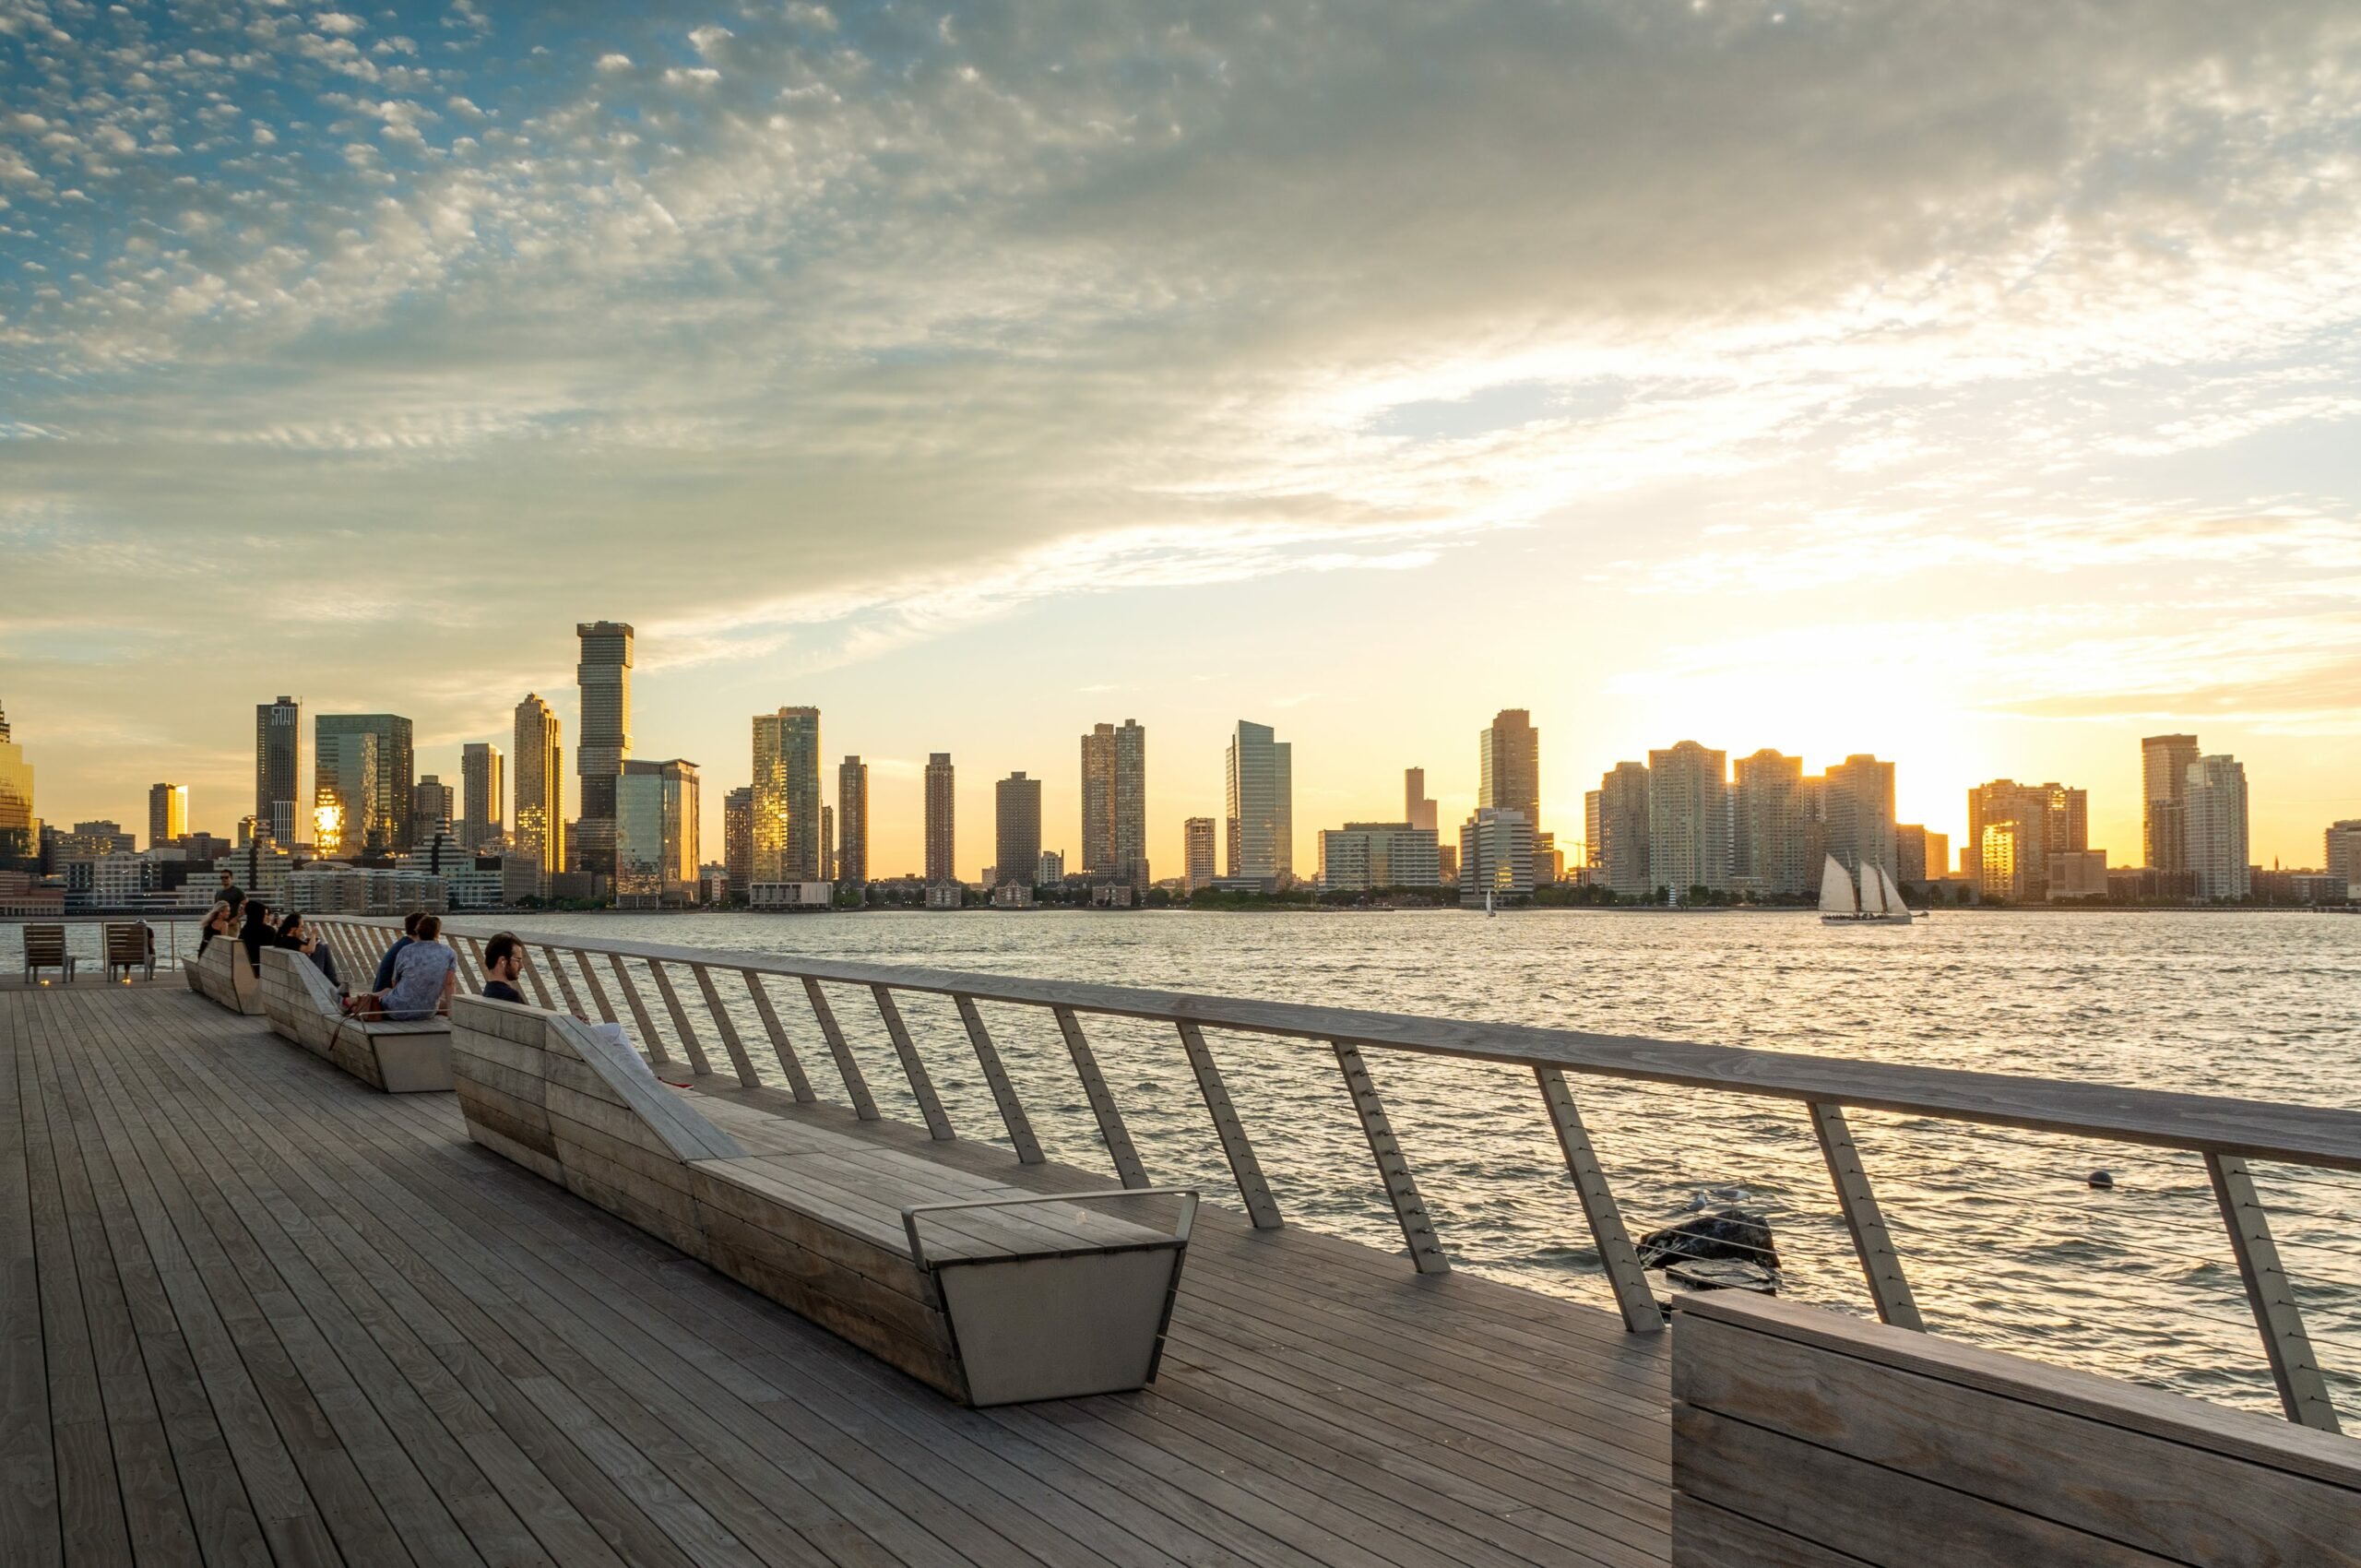 Kebony modified wood Clear Boardwalk Decking city overlook lounge area with reclining seats at Pier 26 during sunset at the Hudson River Park in New York City New York